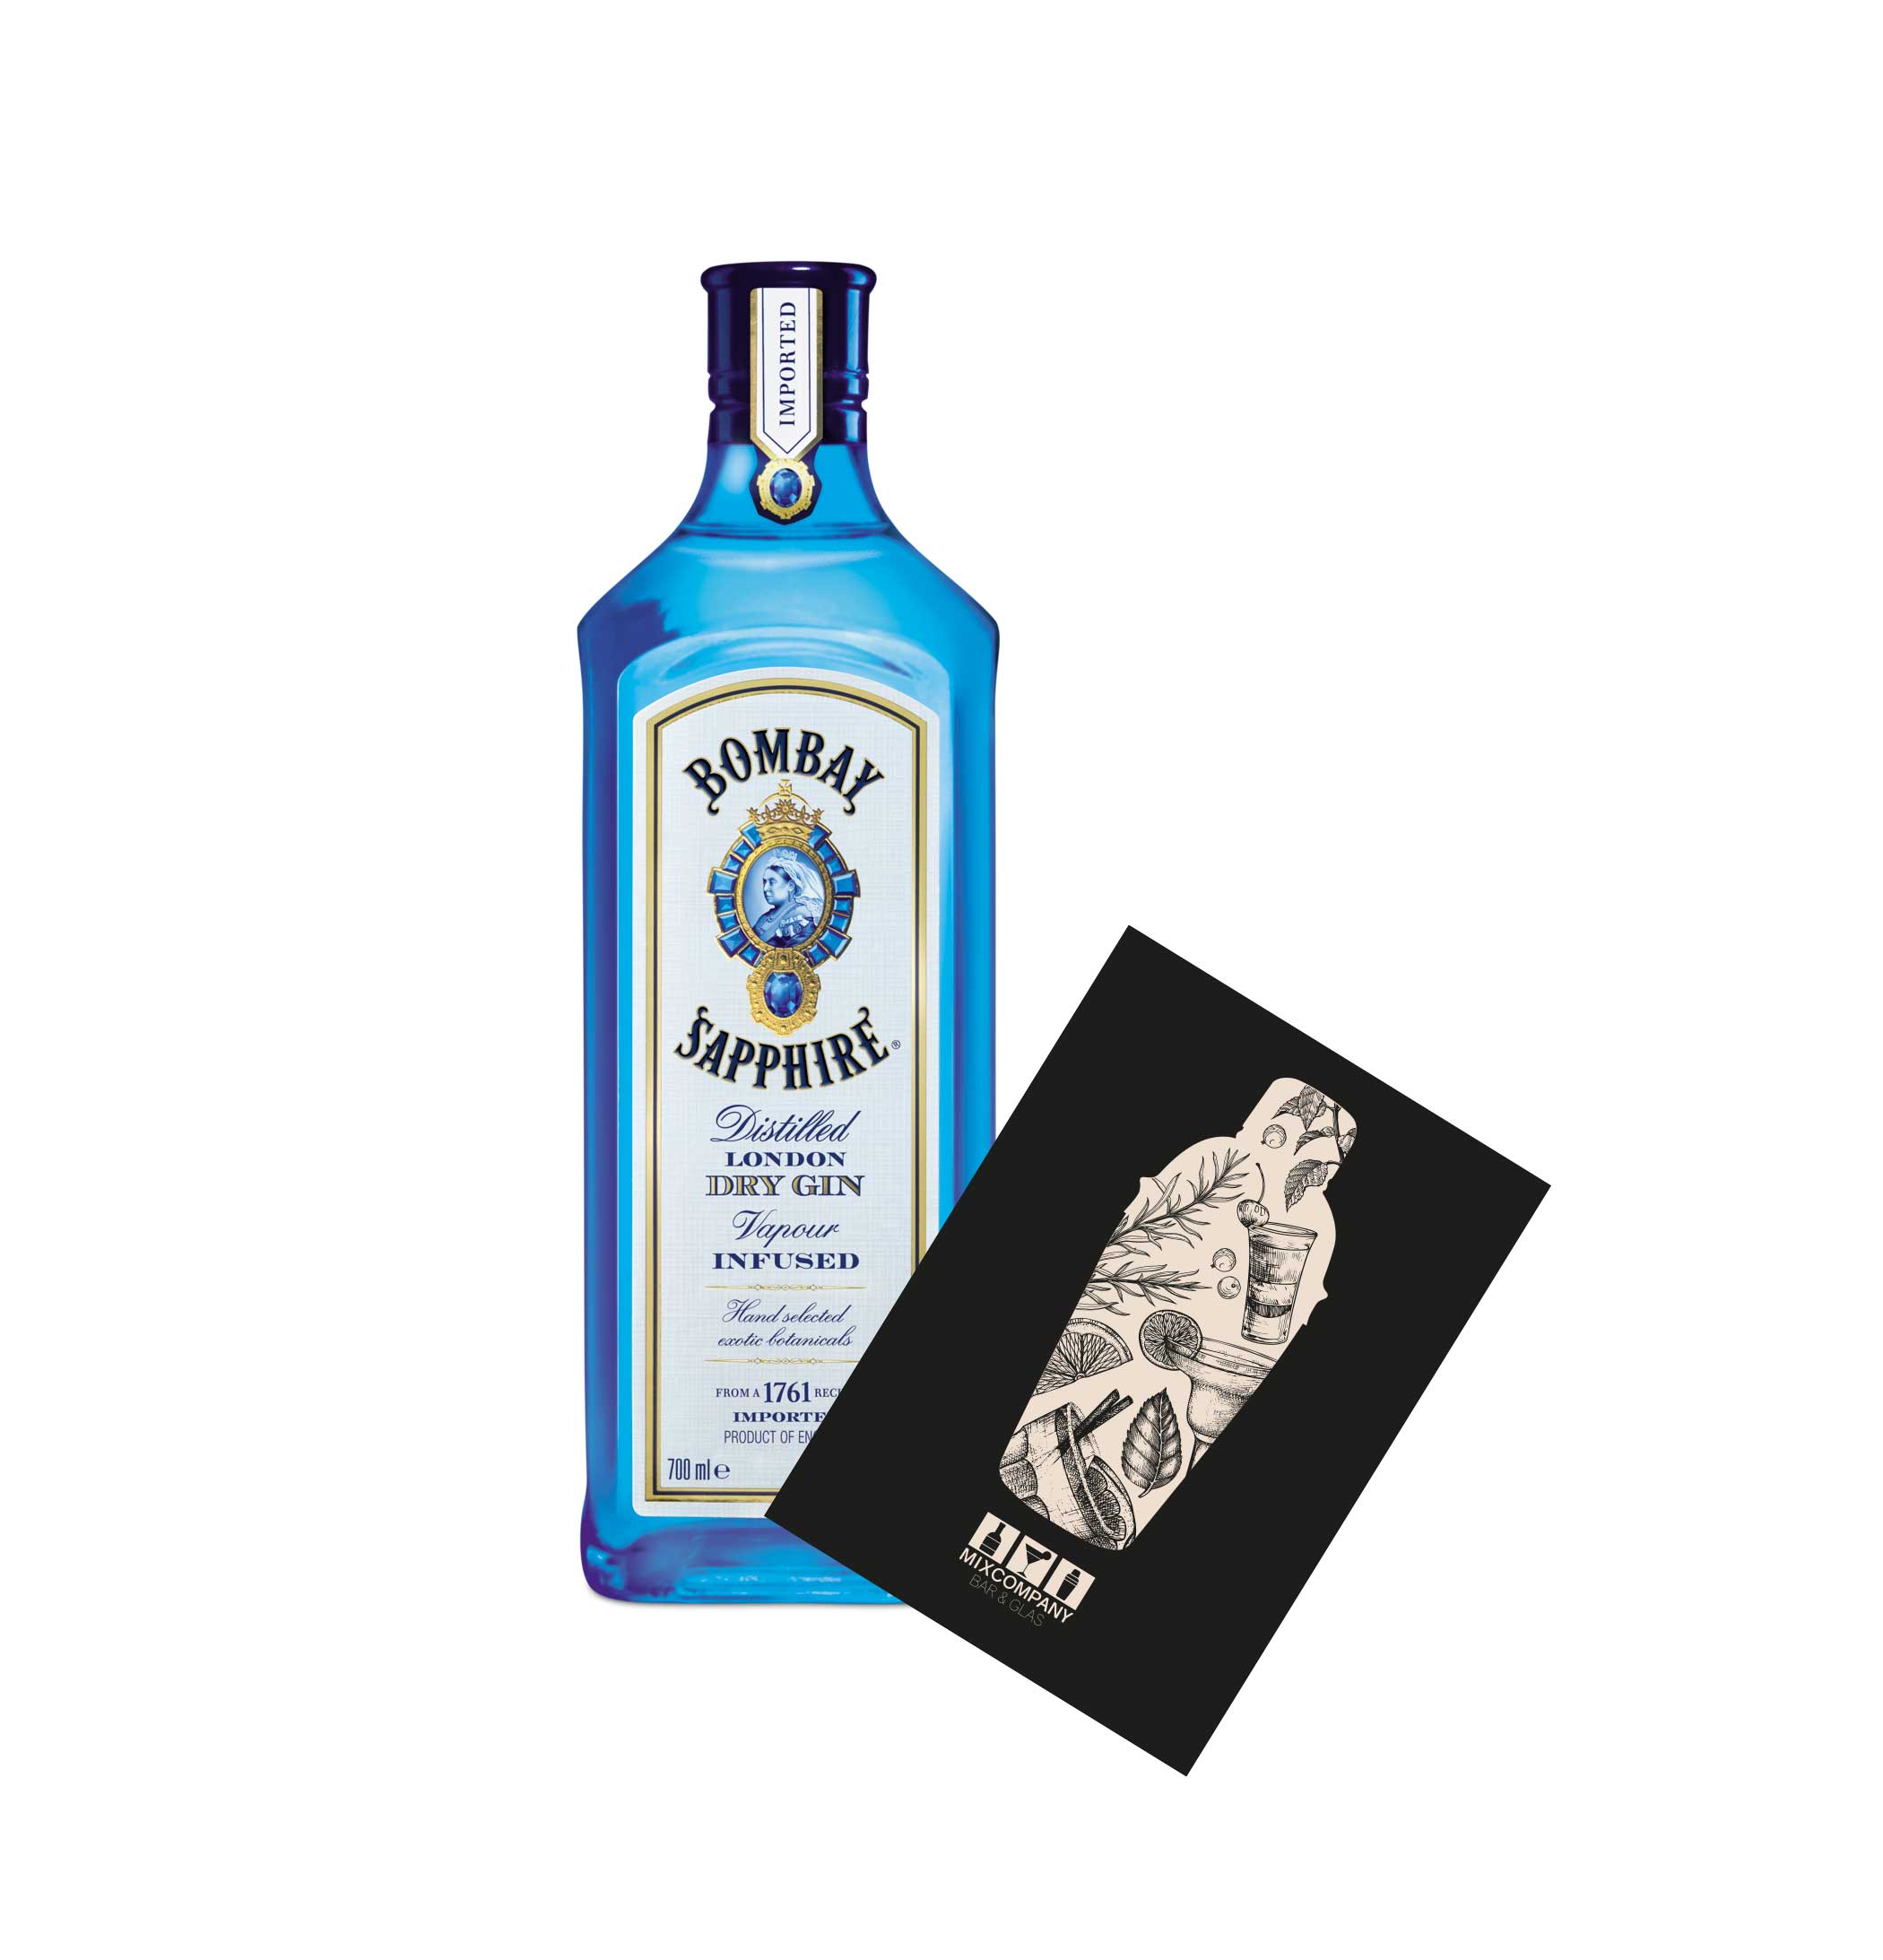 Bombay Sapphire Distilled London Dry Gin 0,7L (40% vol) Vapour infused- [Enthält Sulfite]